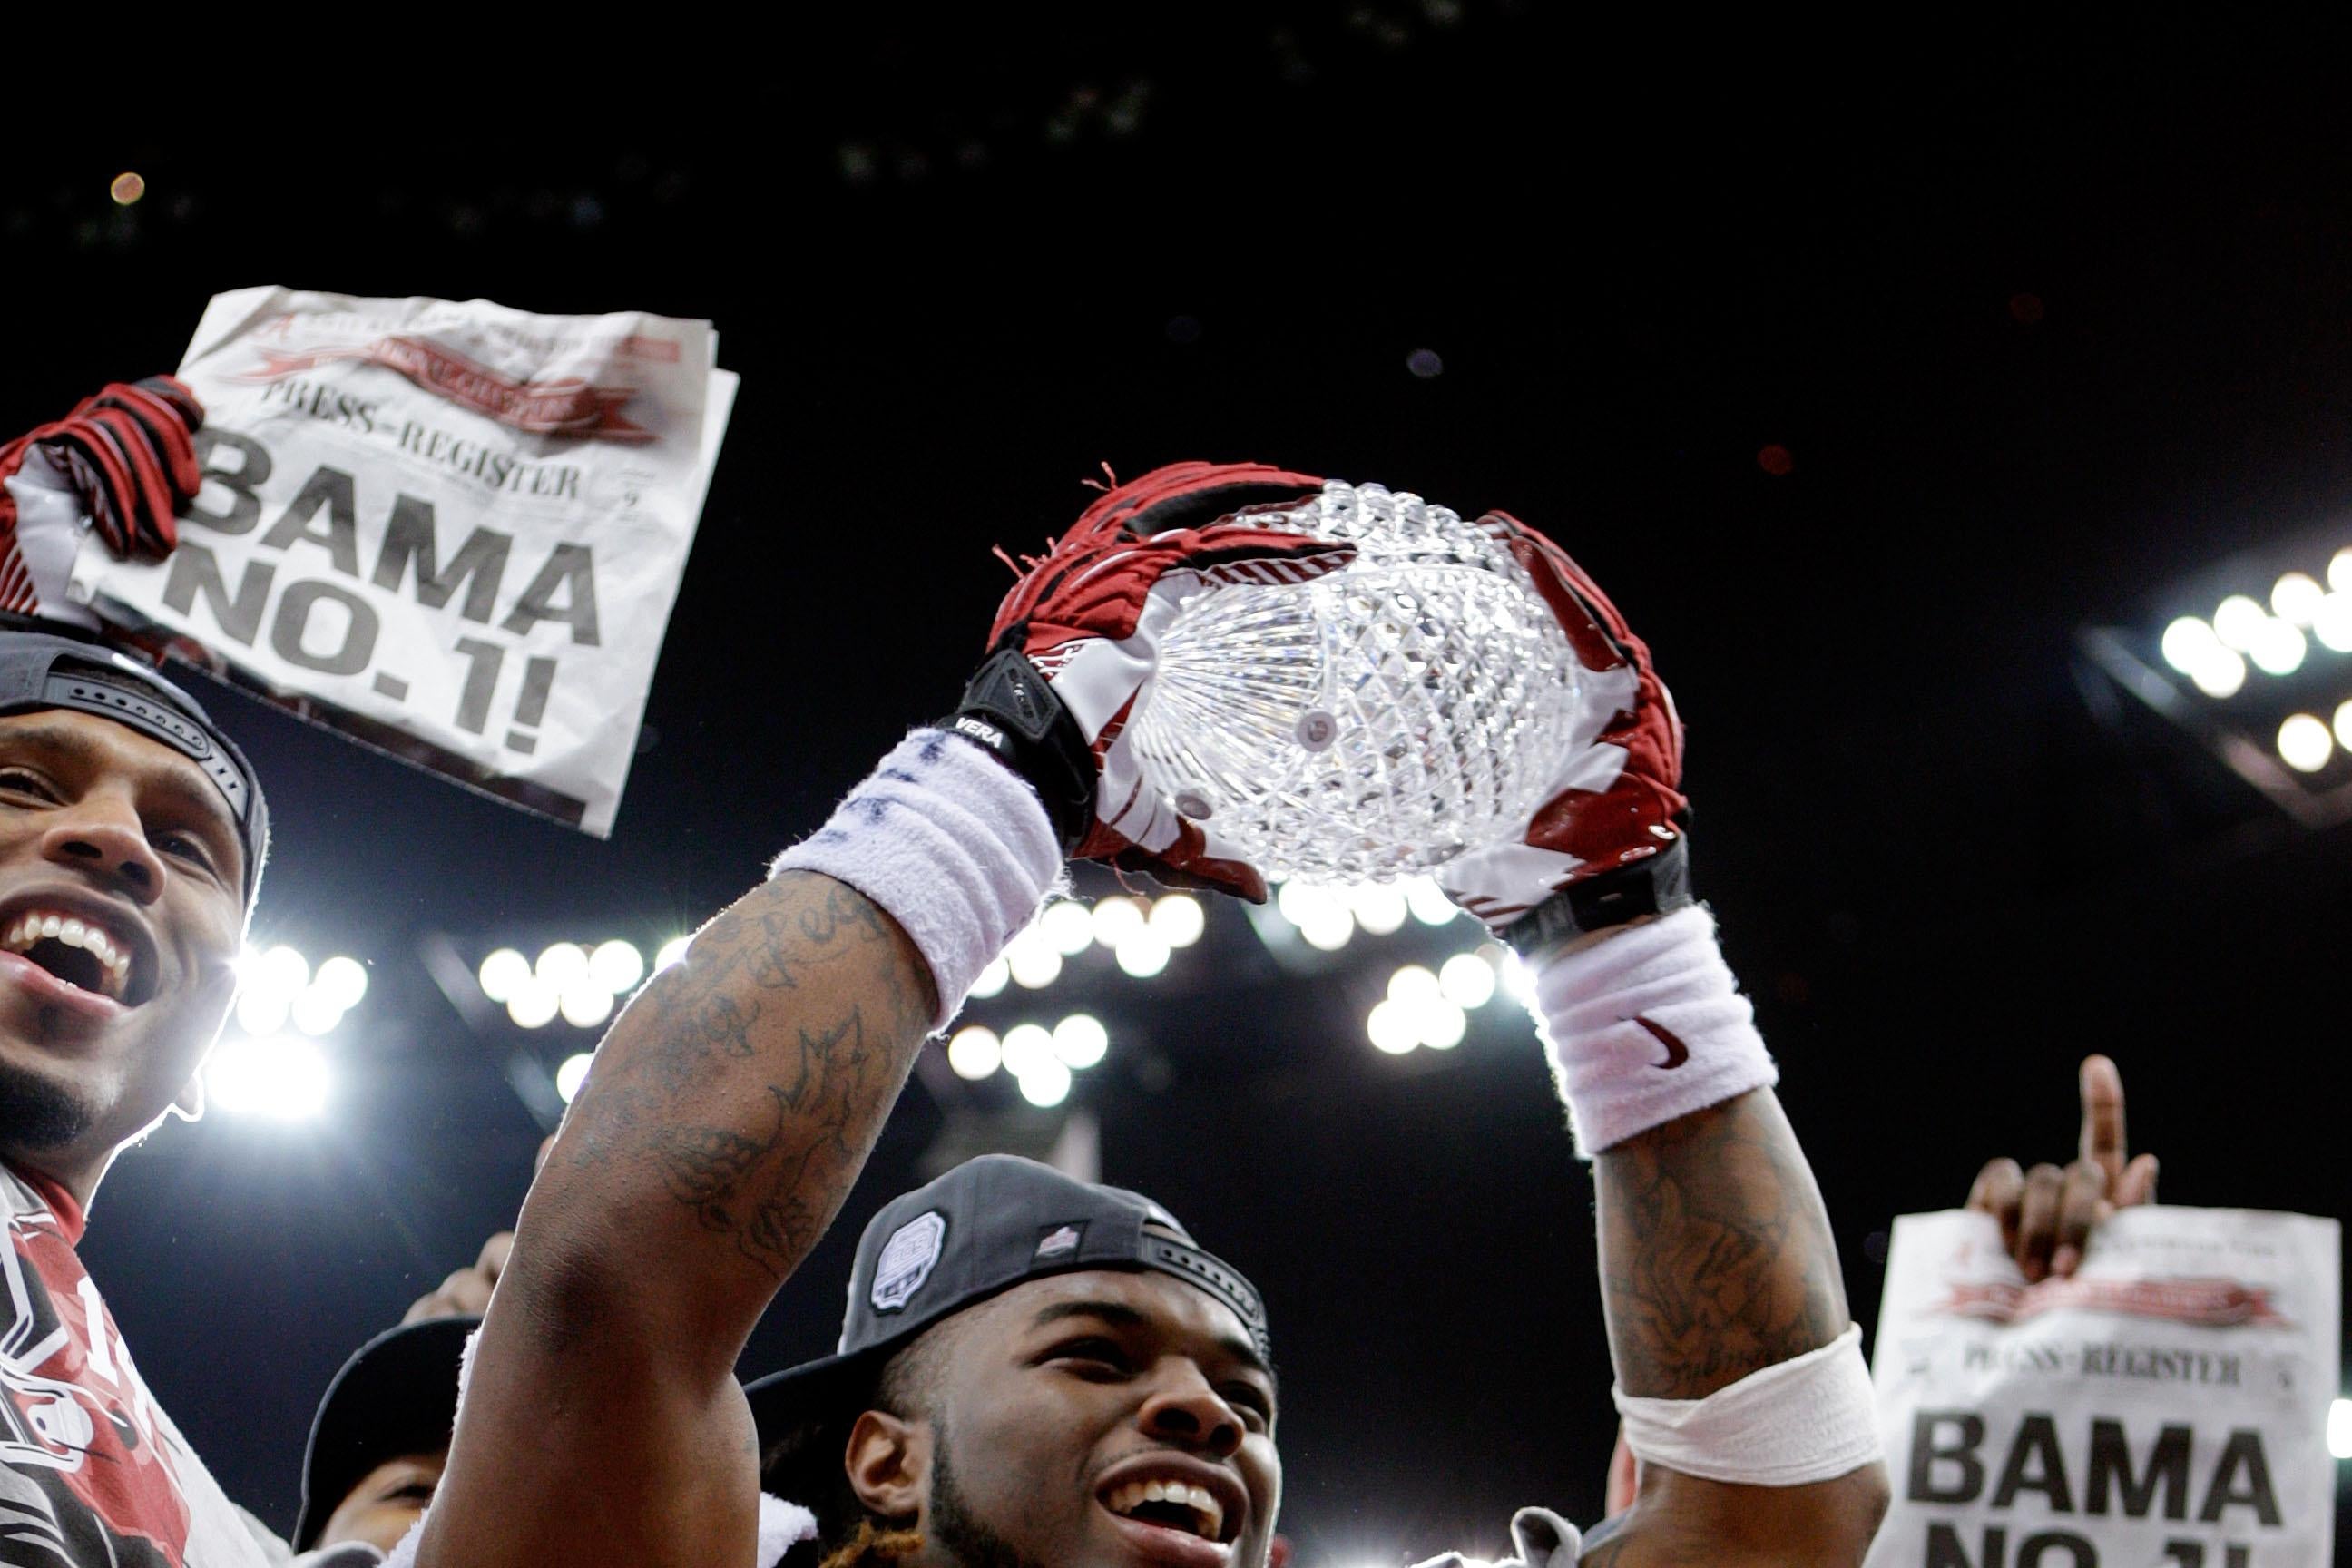 NEW ORLEANS, LA - JANUARY 09:  Trent Richardson #3 of the Alabama Crimson Tide celebrates with the trophy after defeating Louisiana State University Tigers in the 2012 Allstate BCS National Championship Game at Mercedes-Benz Superdome on January 9, 2012 in New Orleans, Louisiana. Alabama  won the game by a score of 21-0.  (Photo by Andy Lyons/Getty Images)